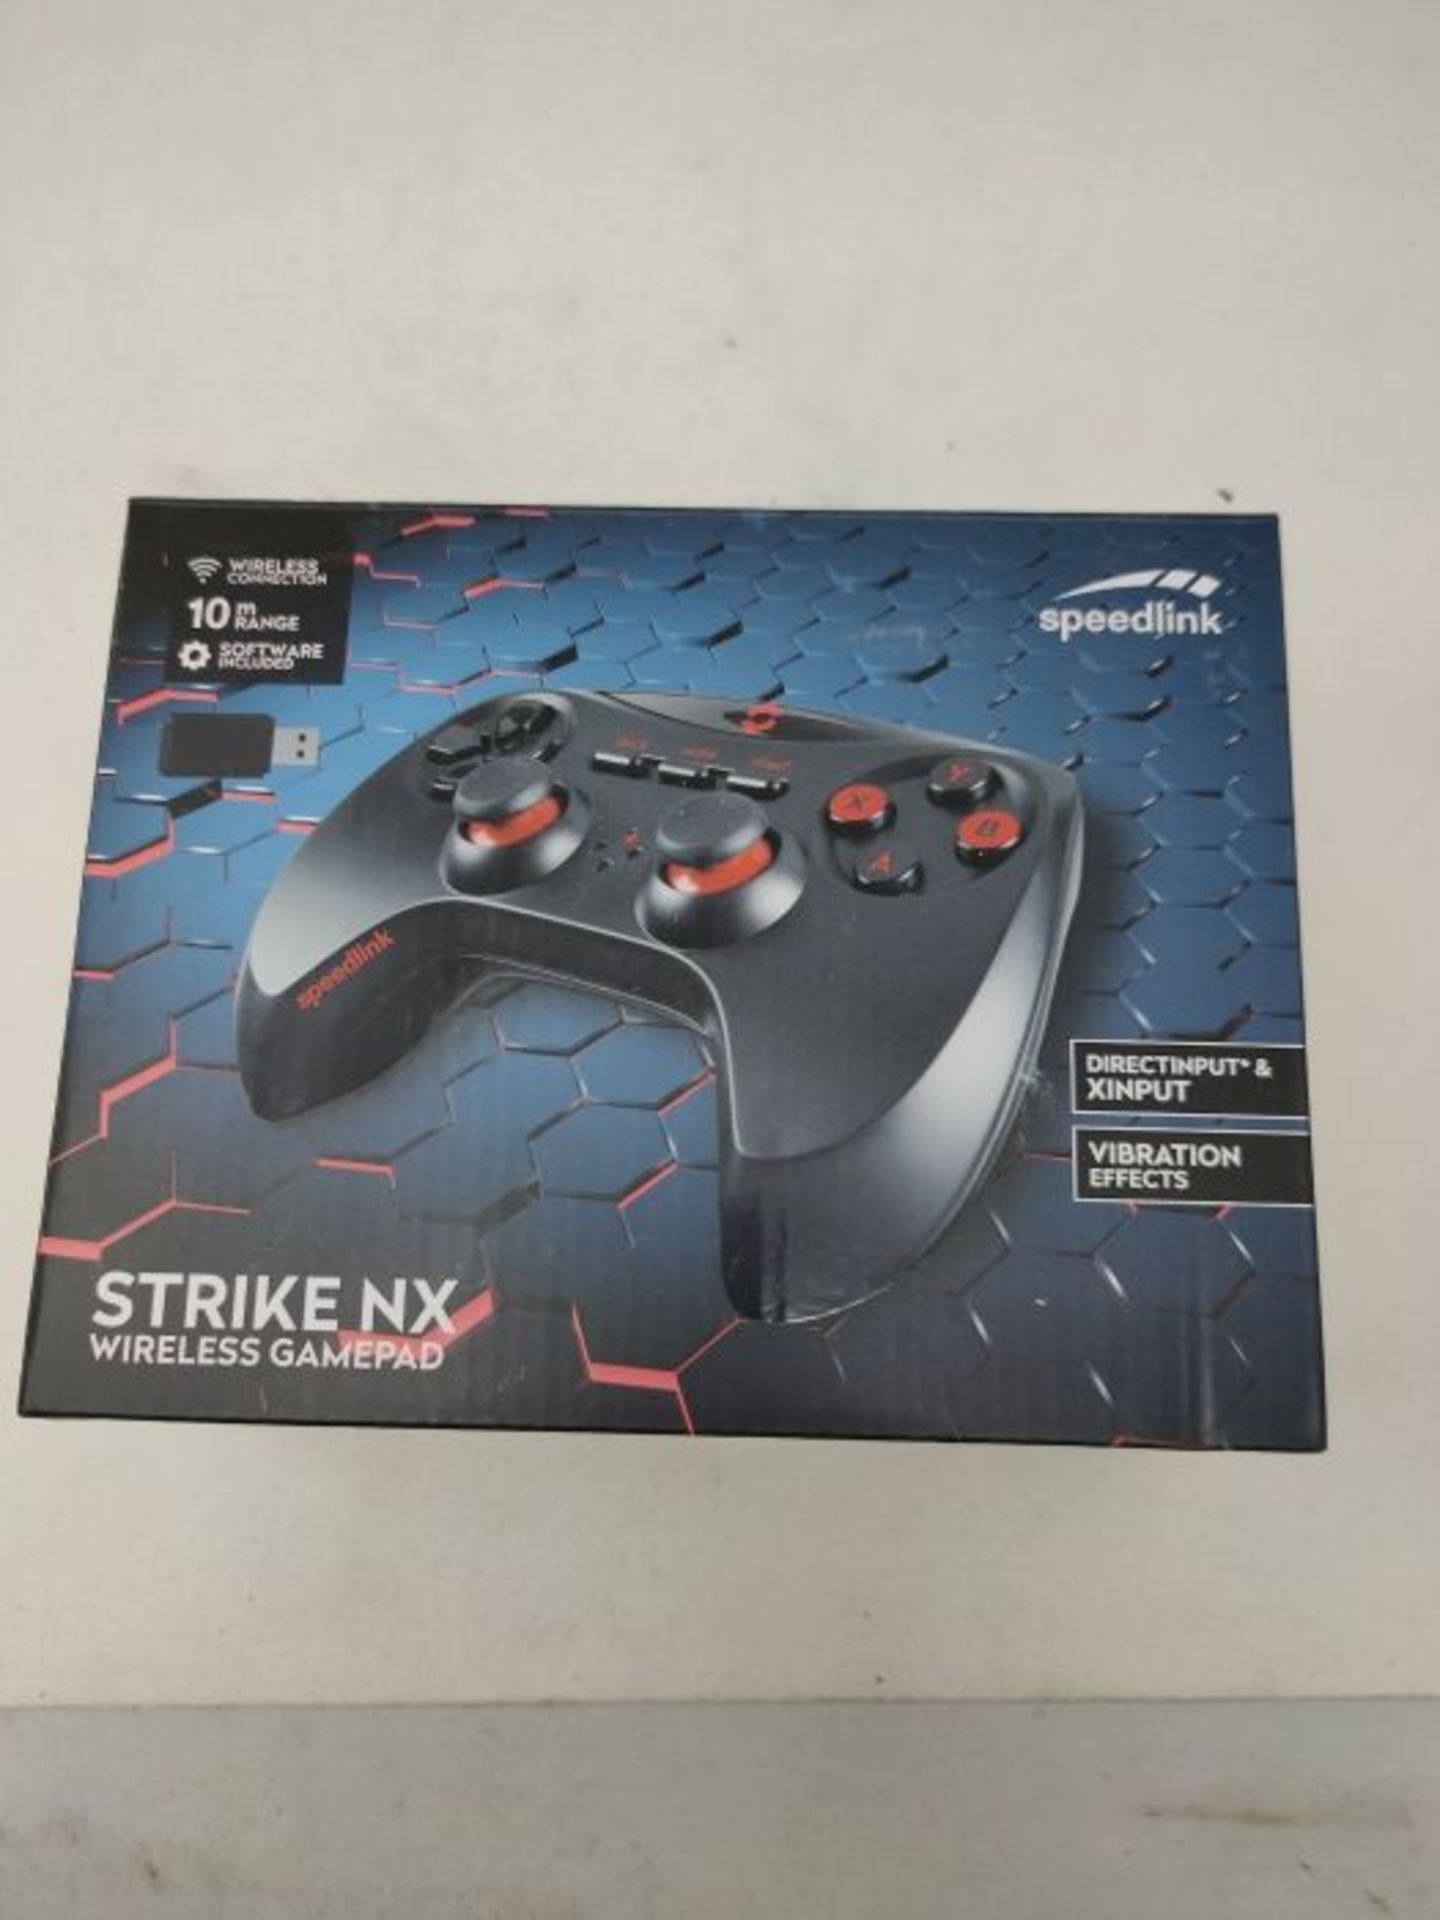 Speedlink STRIKE NX Gamepad for PC - Gaming controller - Highly realistic vibrations - - Image 2 of 3